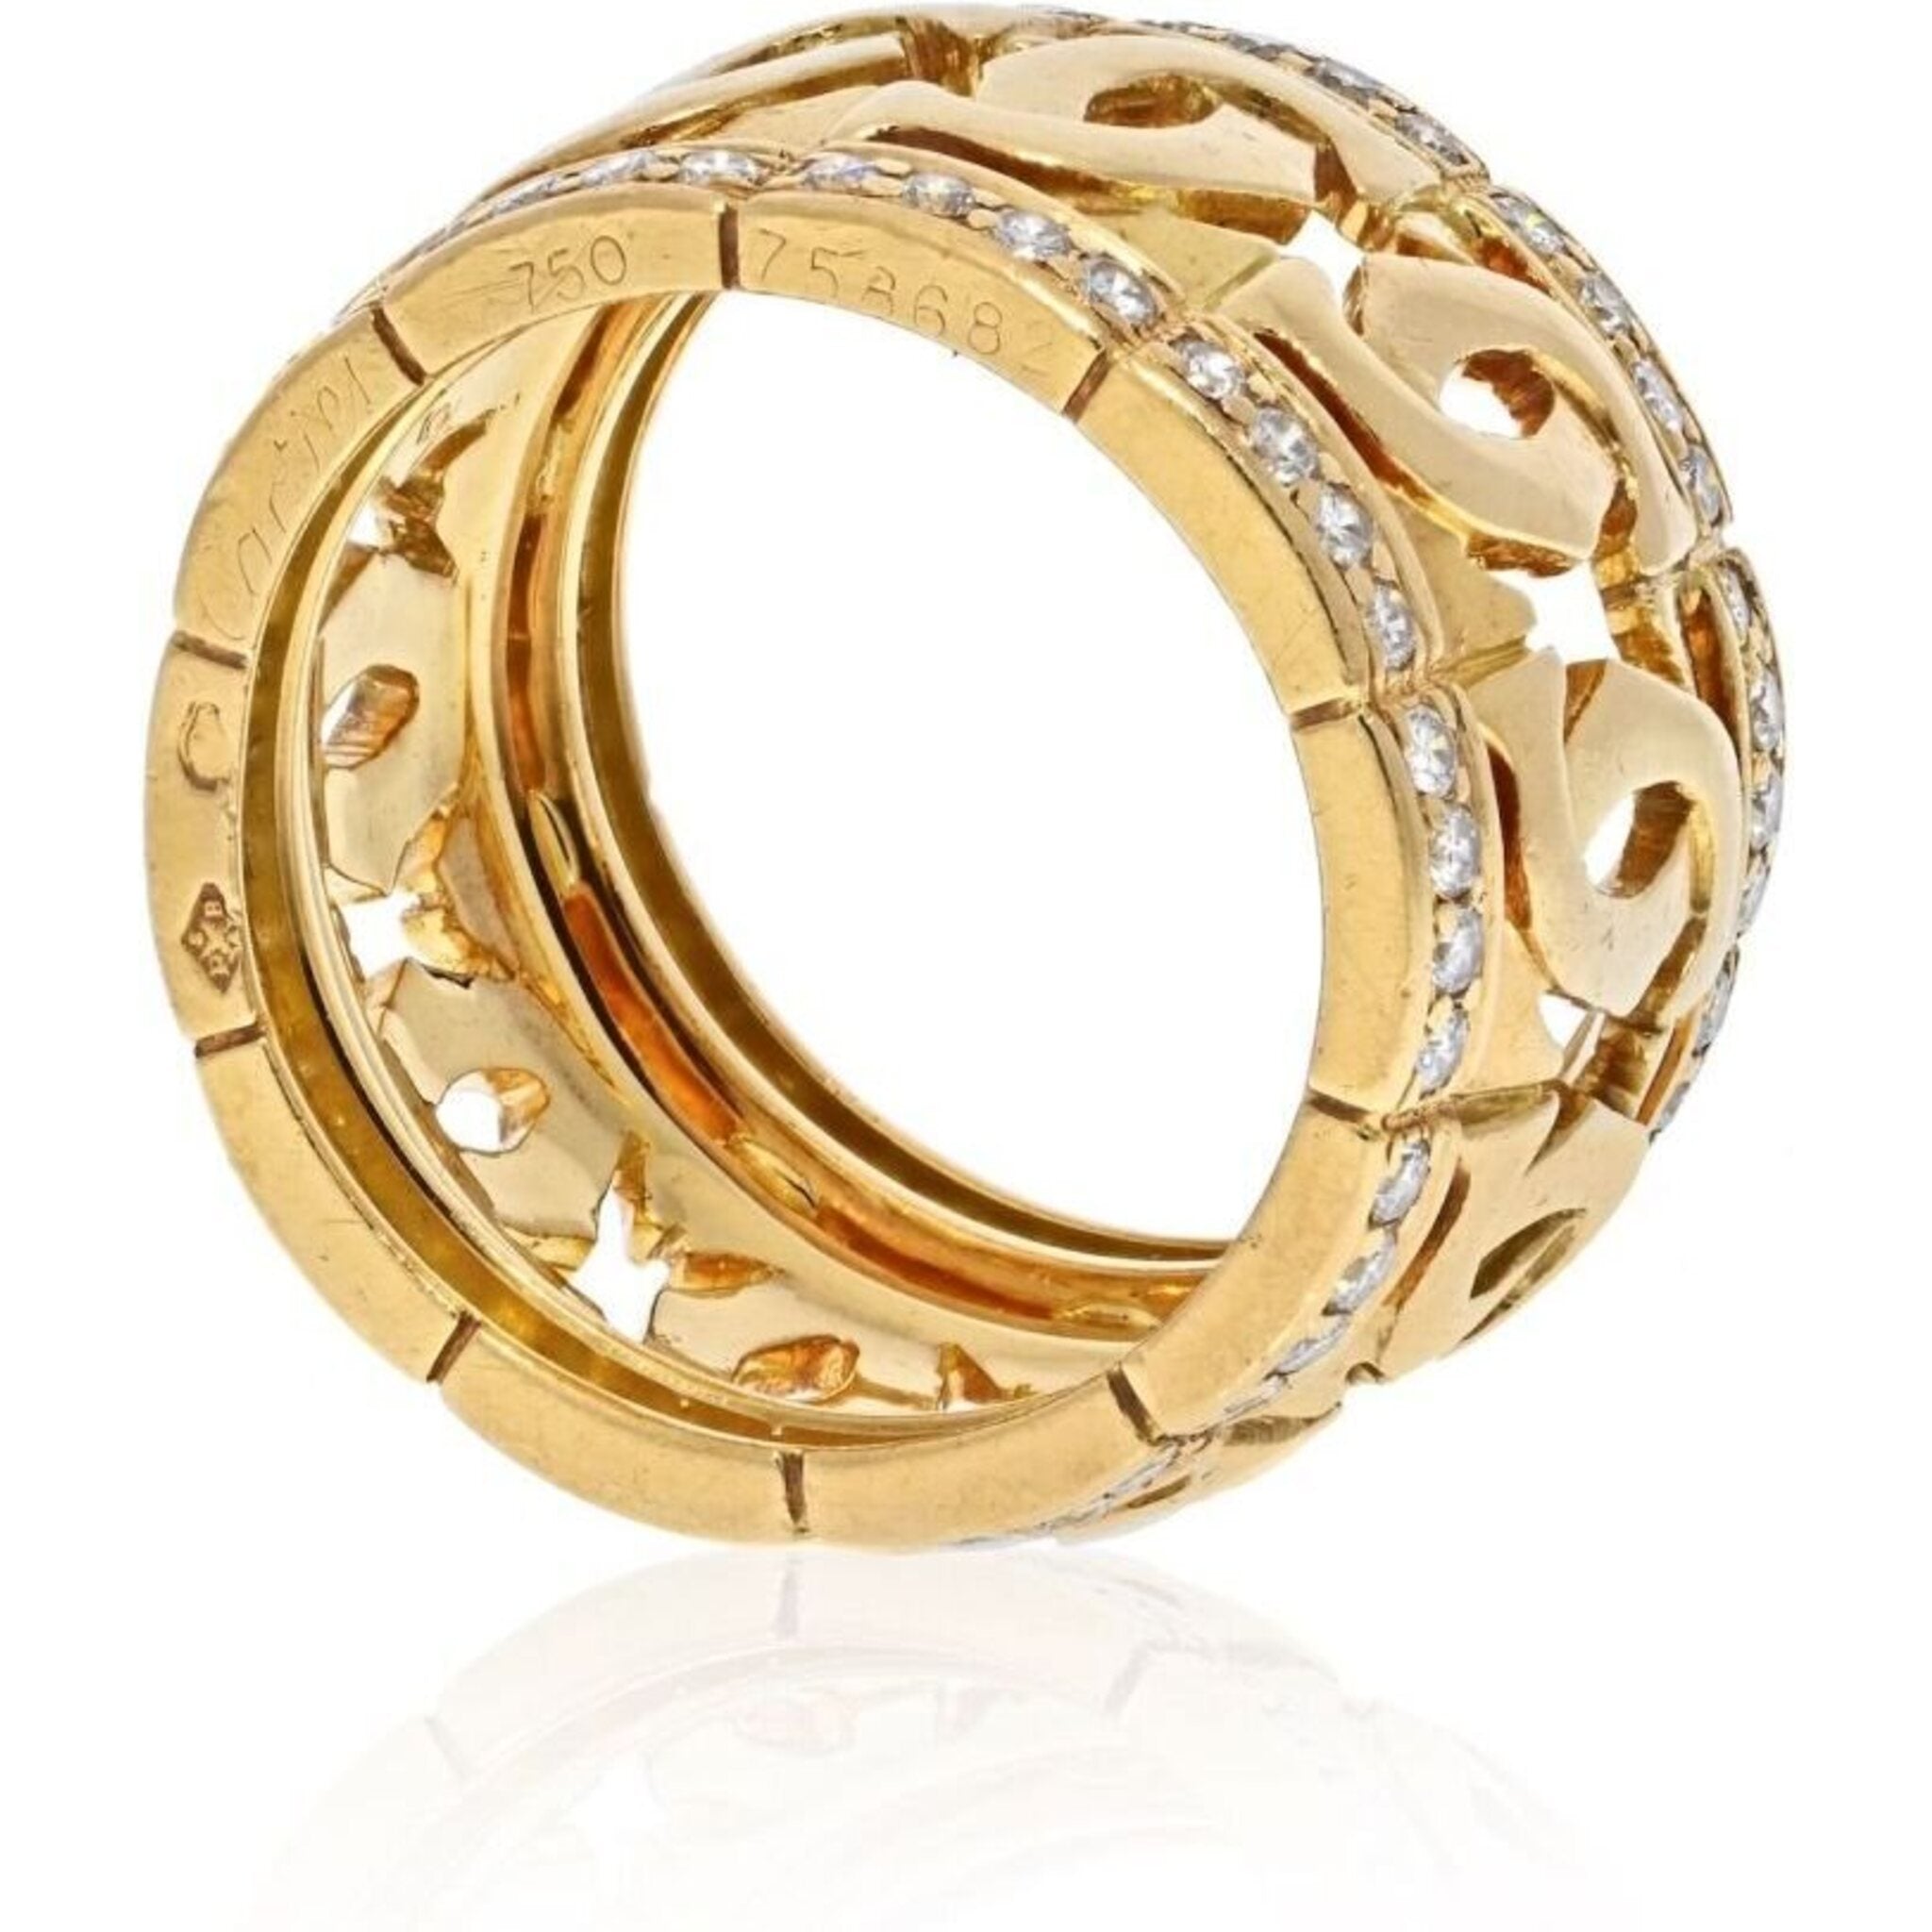 Cartier Double C Tri-Color Gold Diamond Ring | $0 CDB Jewelry